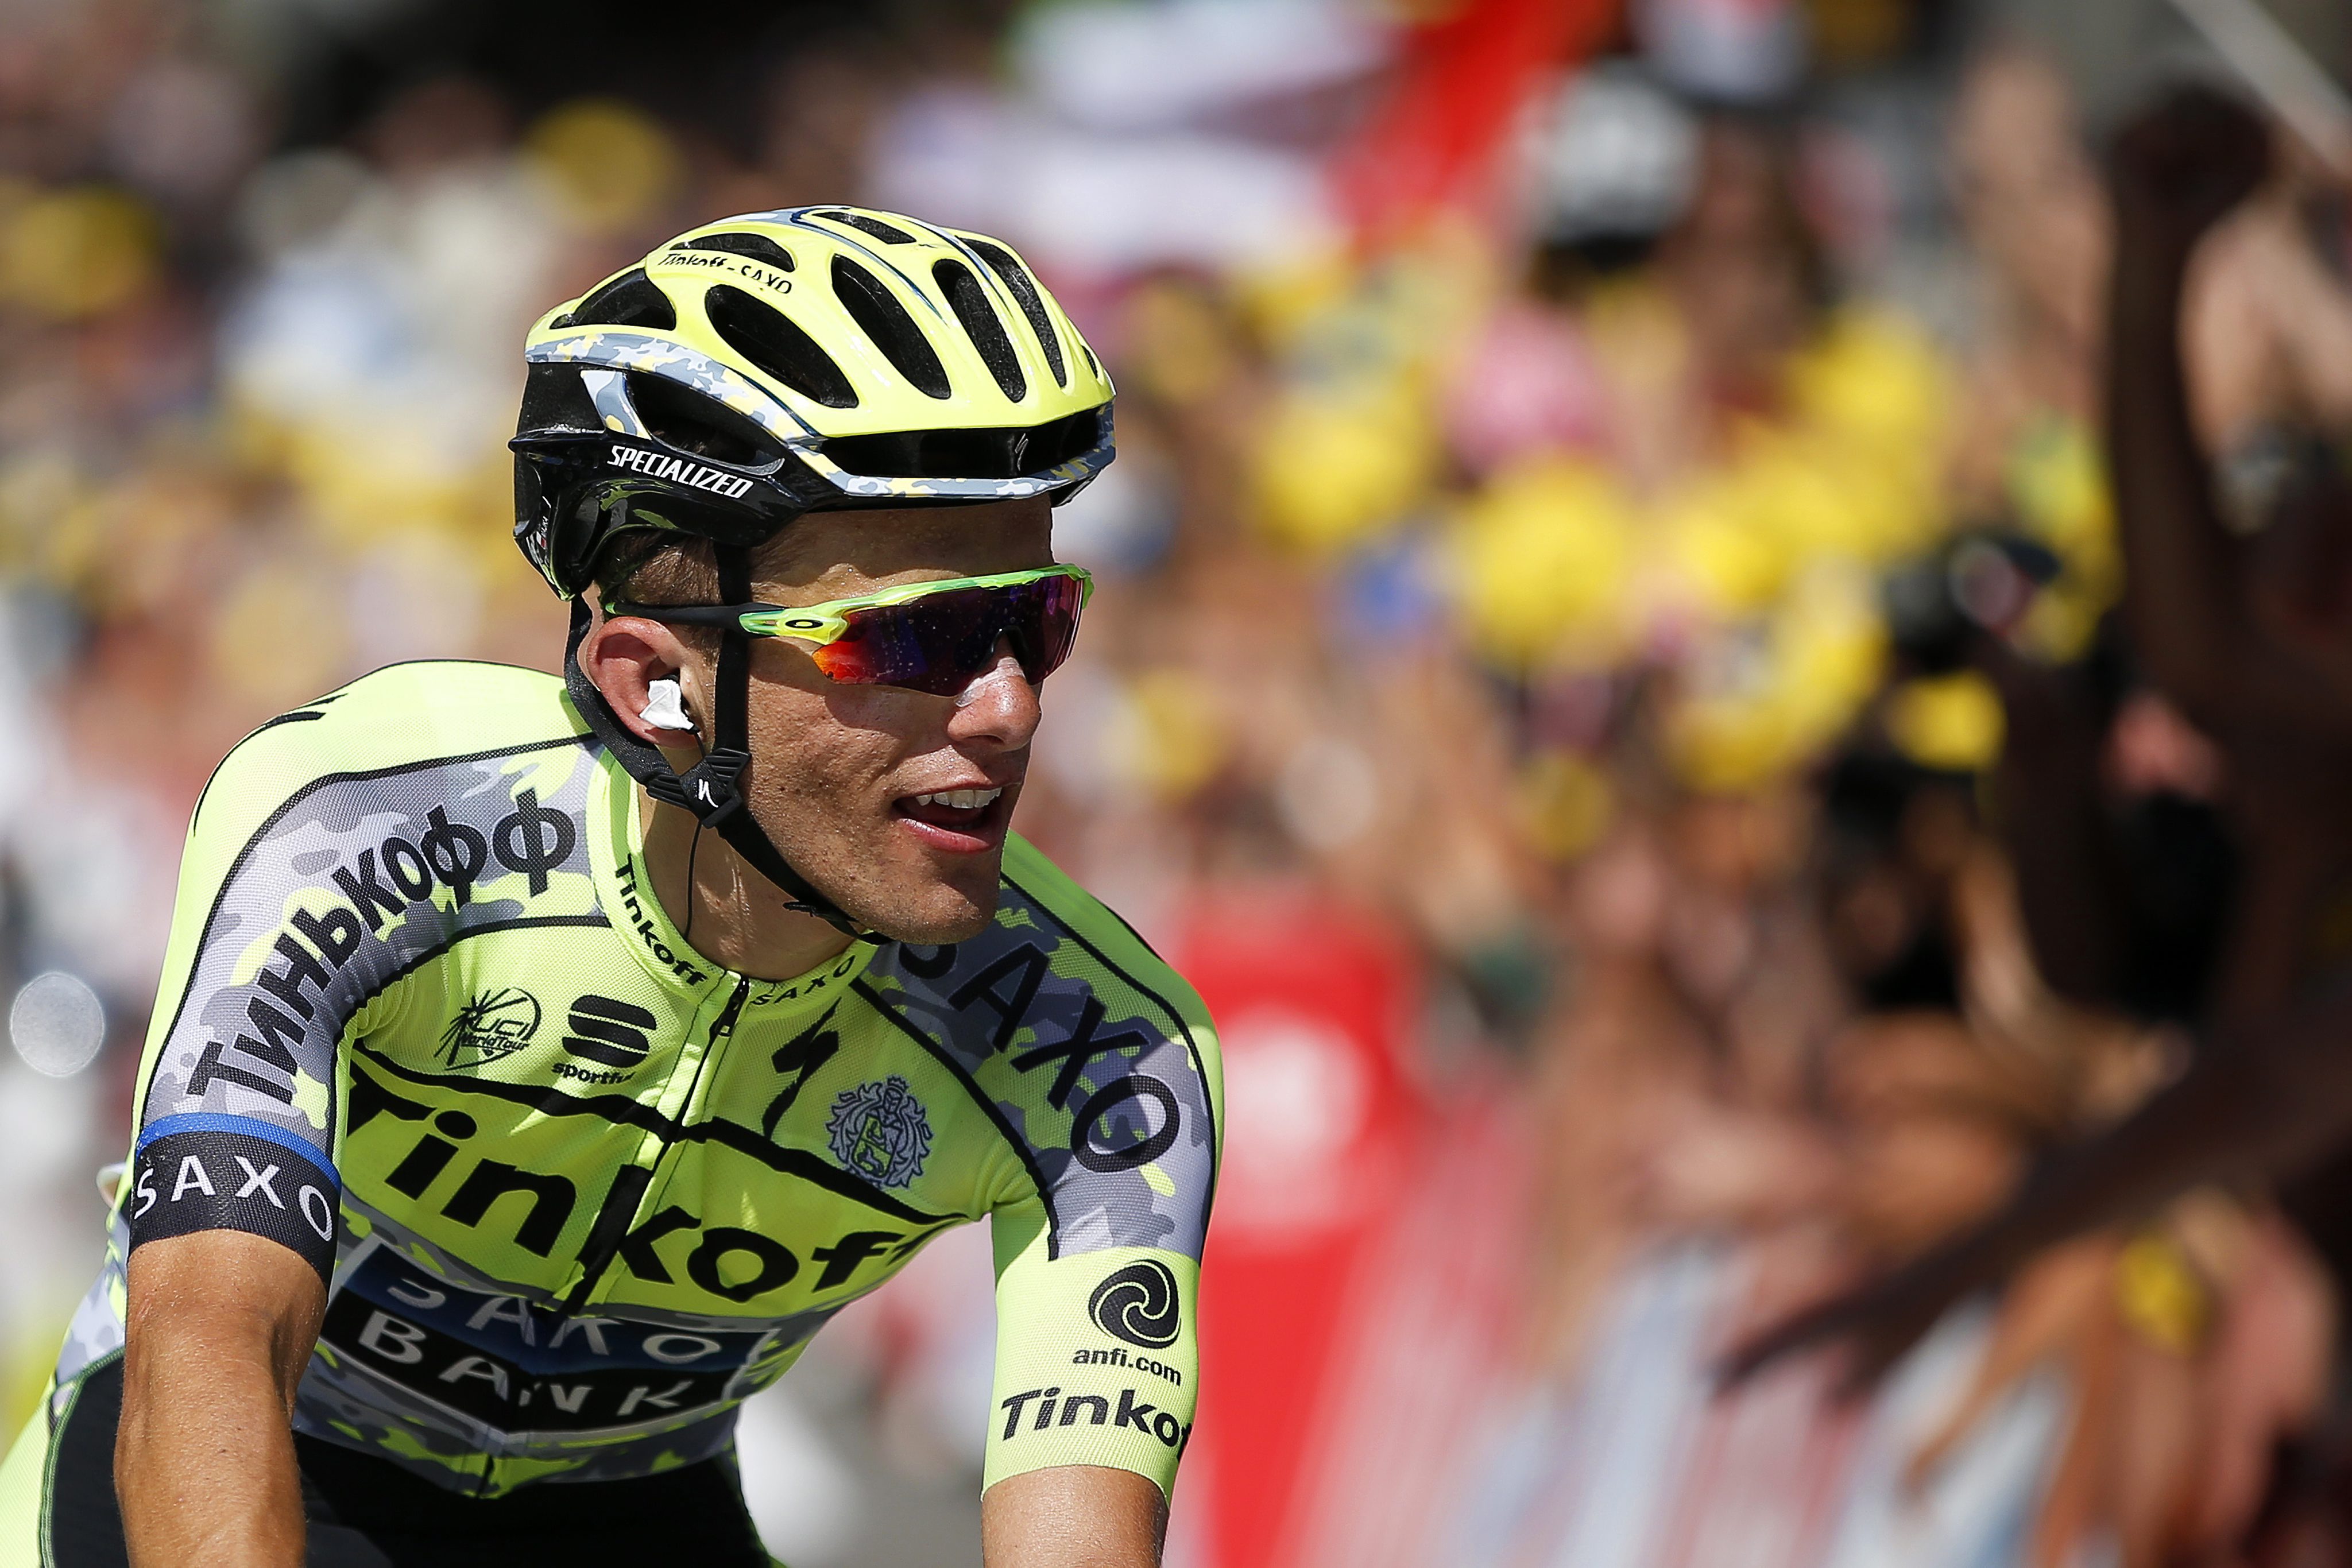 Tinkoff Saxo team rider Rafal Majka of Poland reacts as he crosses the finish line to win the 11th stage of the Tour de France 2015 between Pau and Cauterets. Photo: EPA